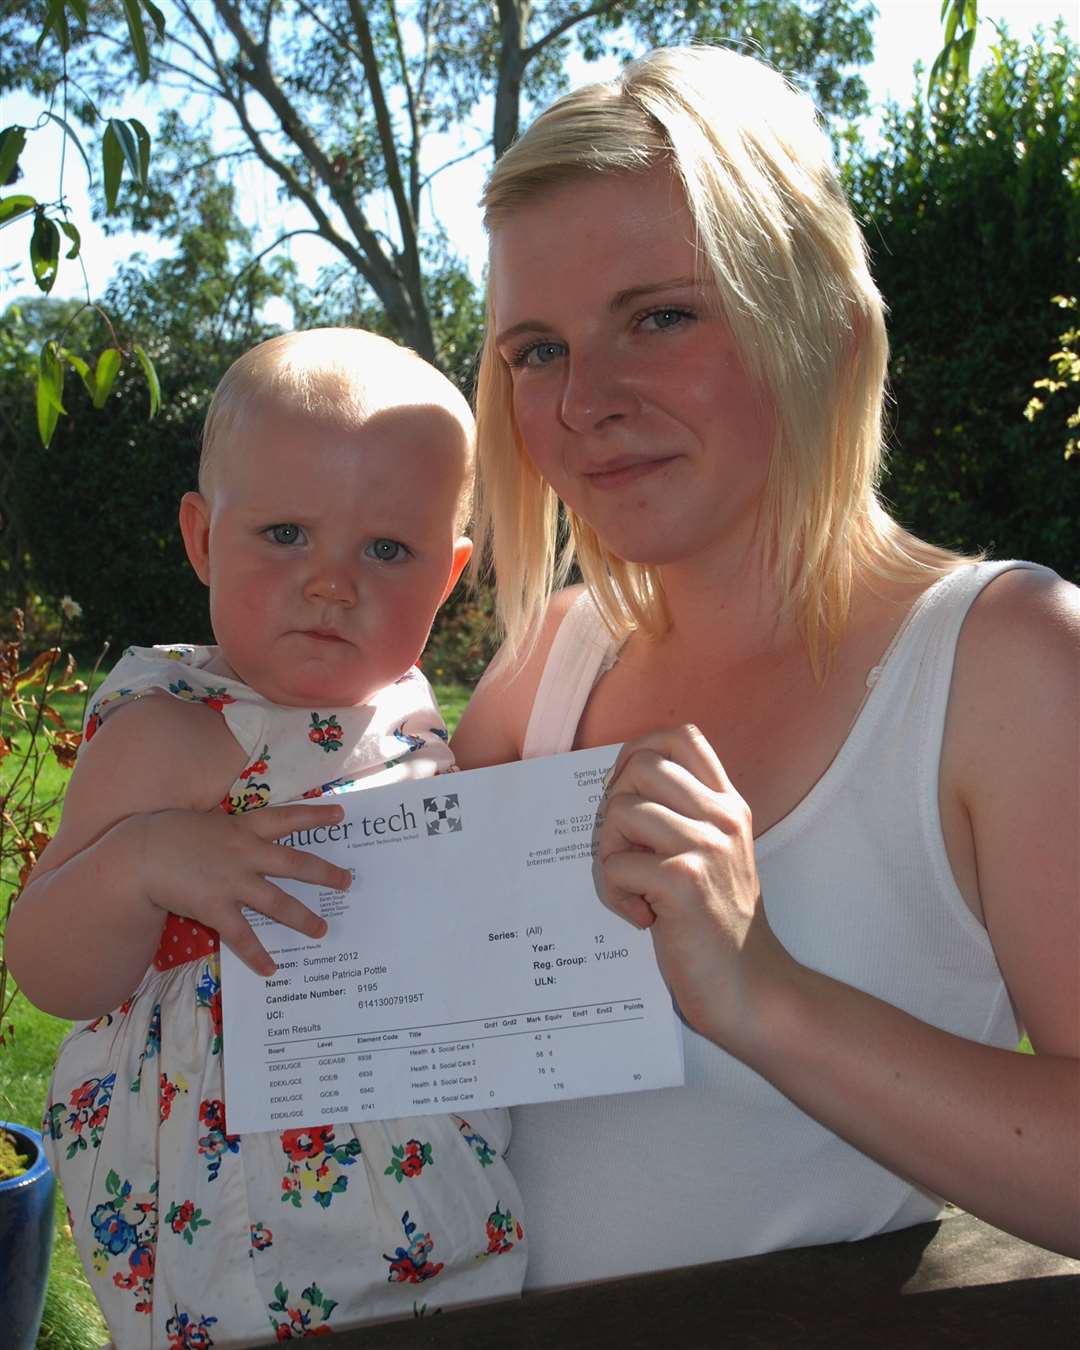 Louise celebrating her AS level exam results with baby daughter Ella in 2012